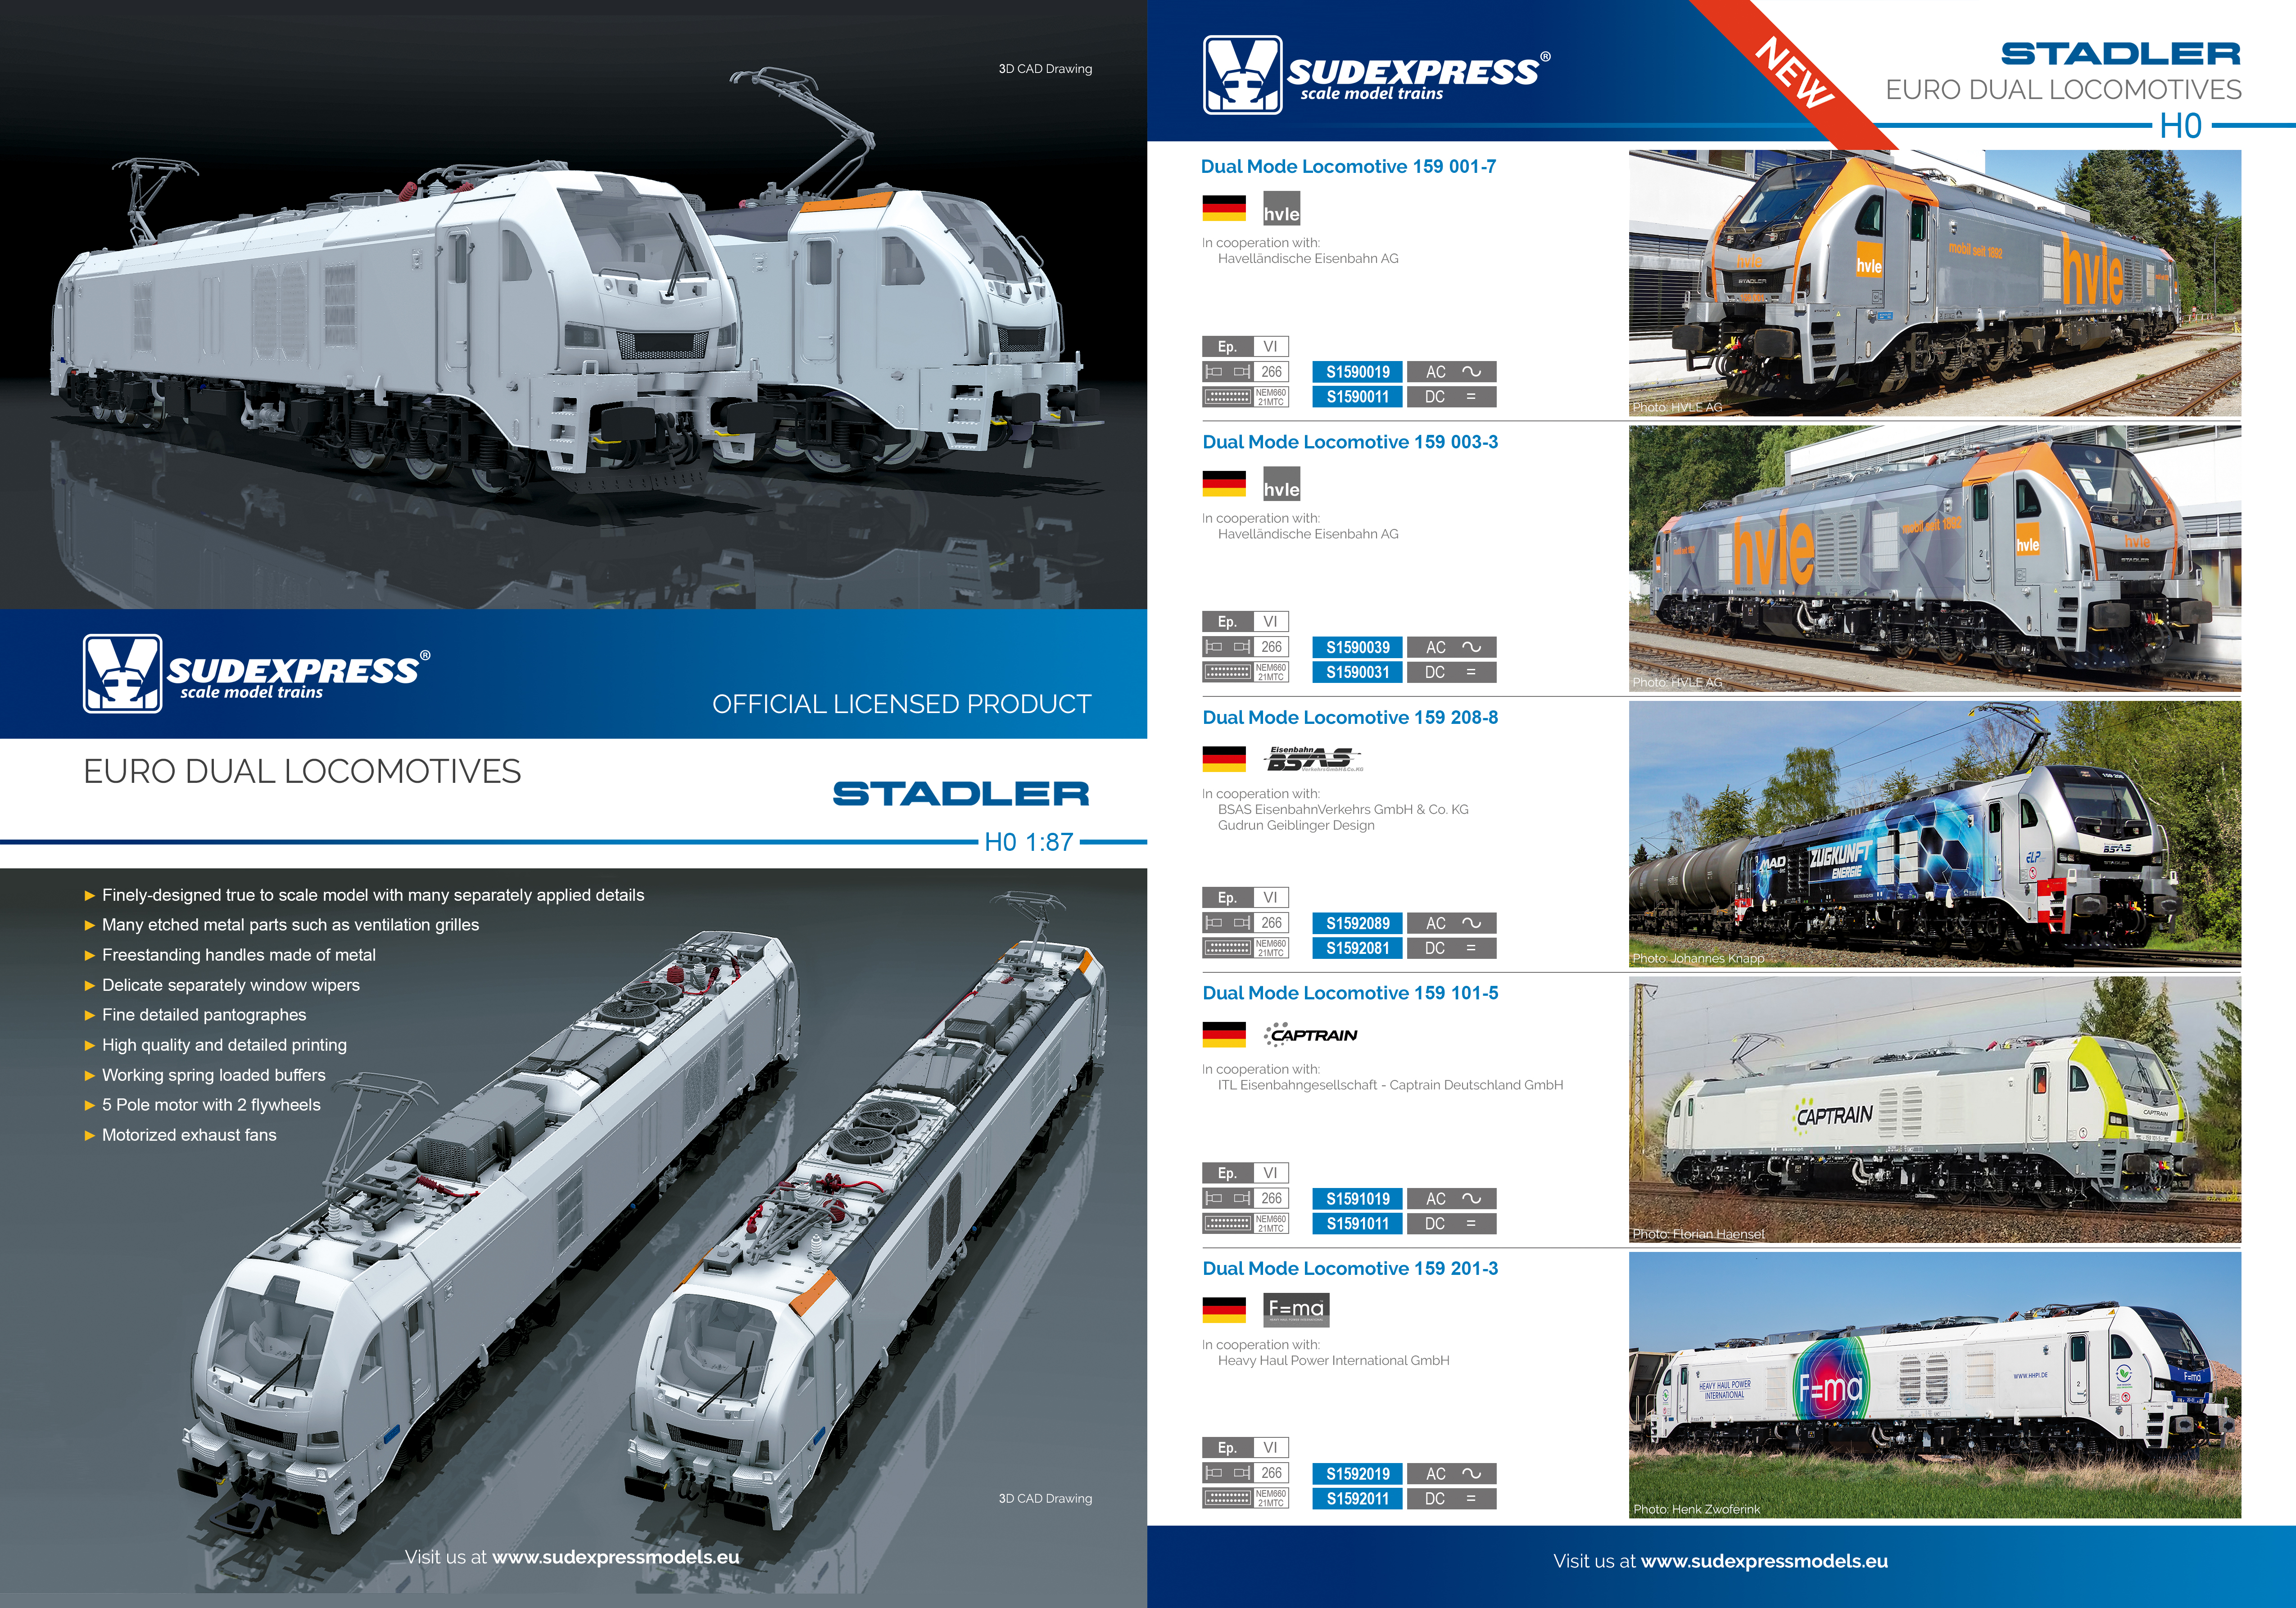 First edition of STADLER Euro Dual locomotives in H0 scale